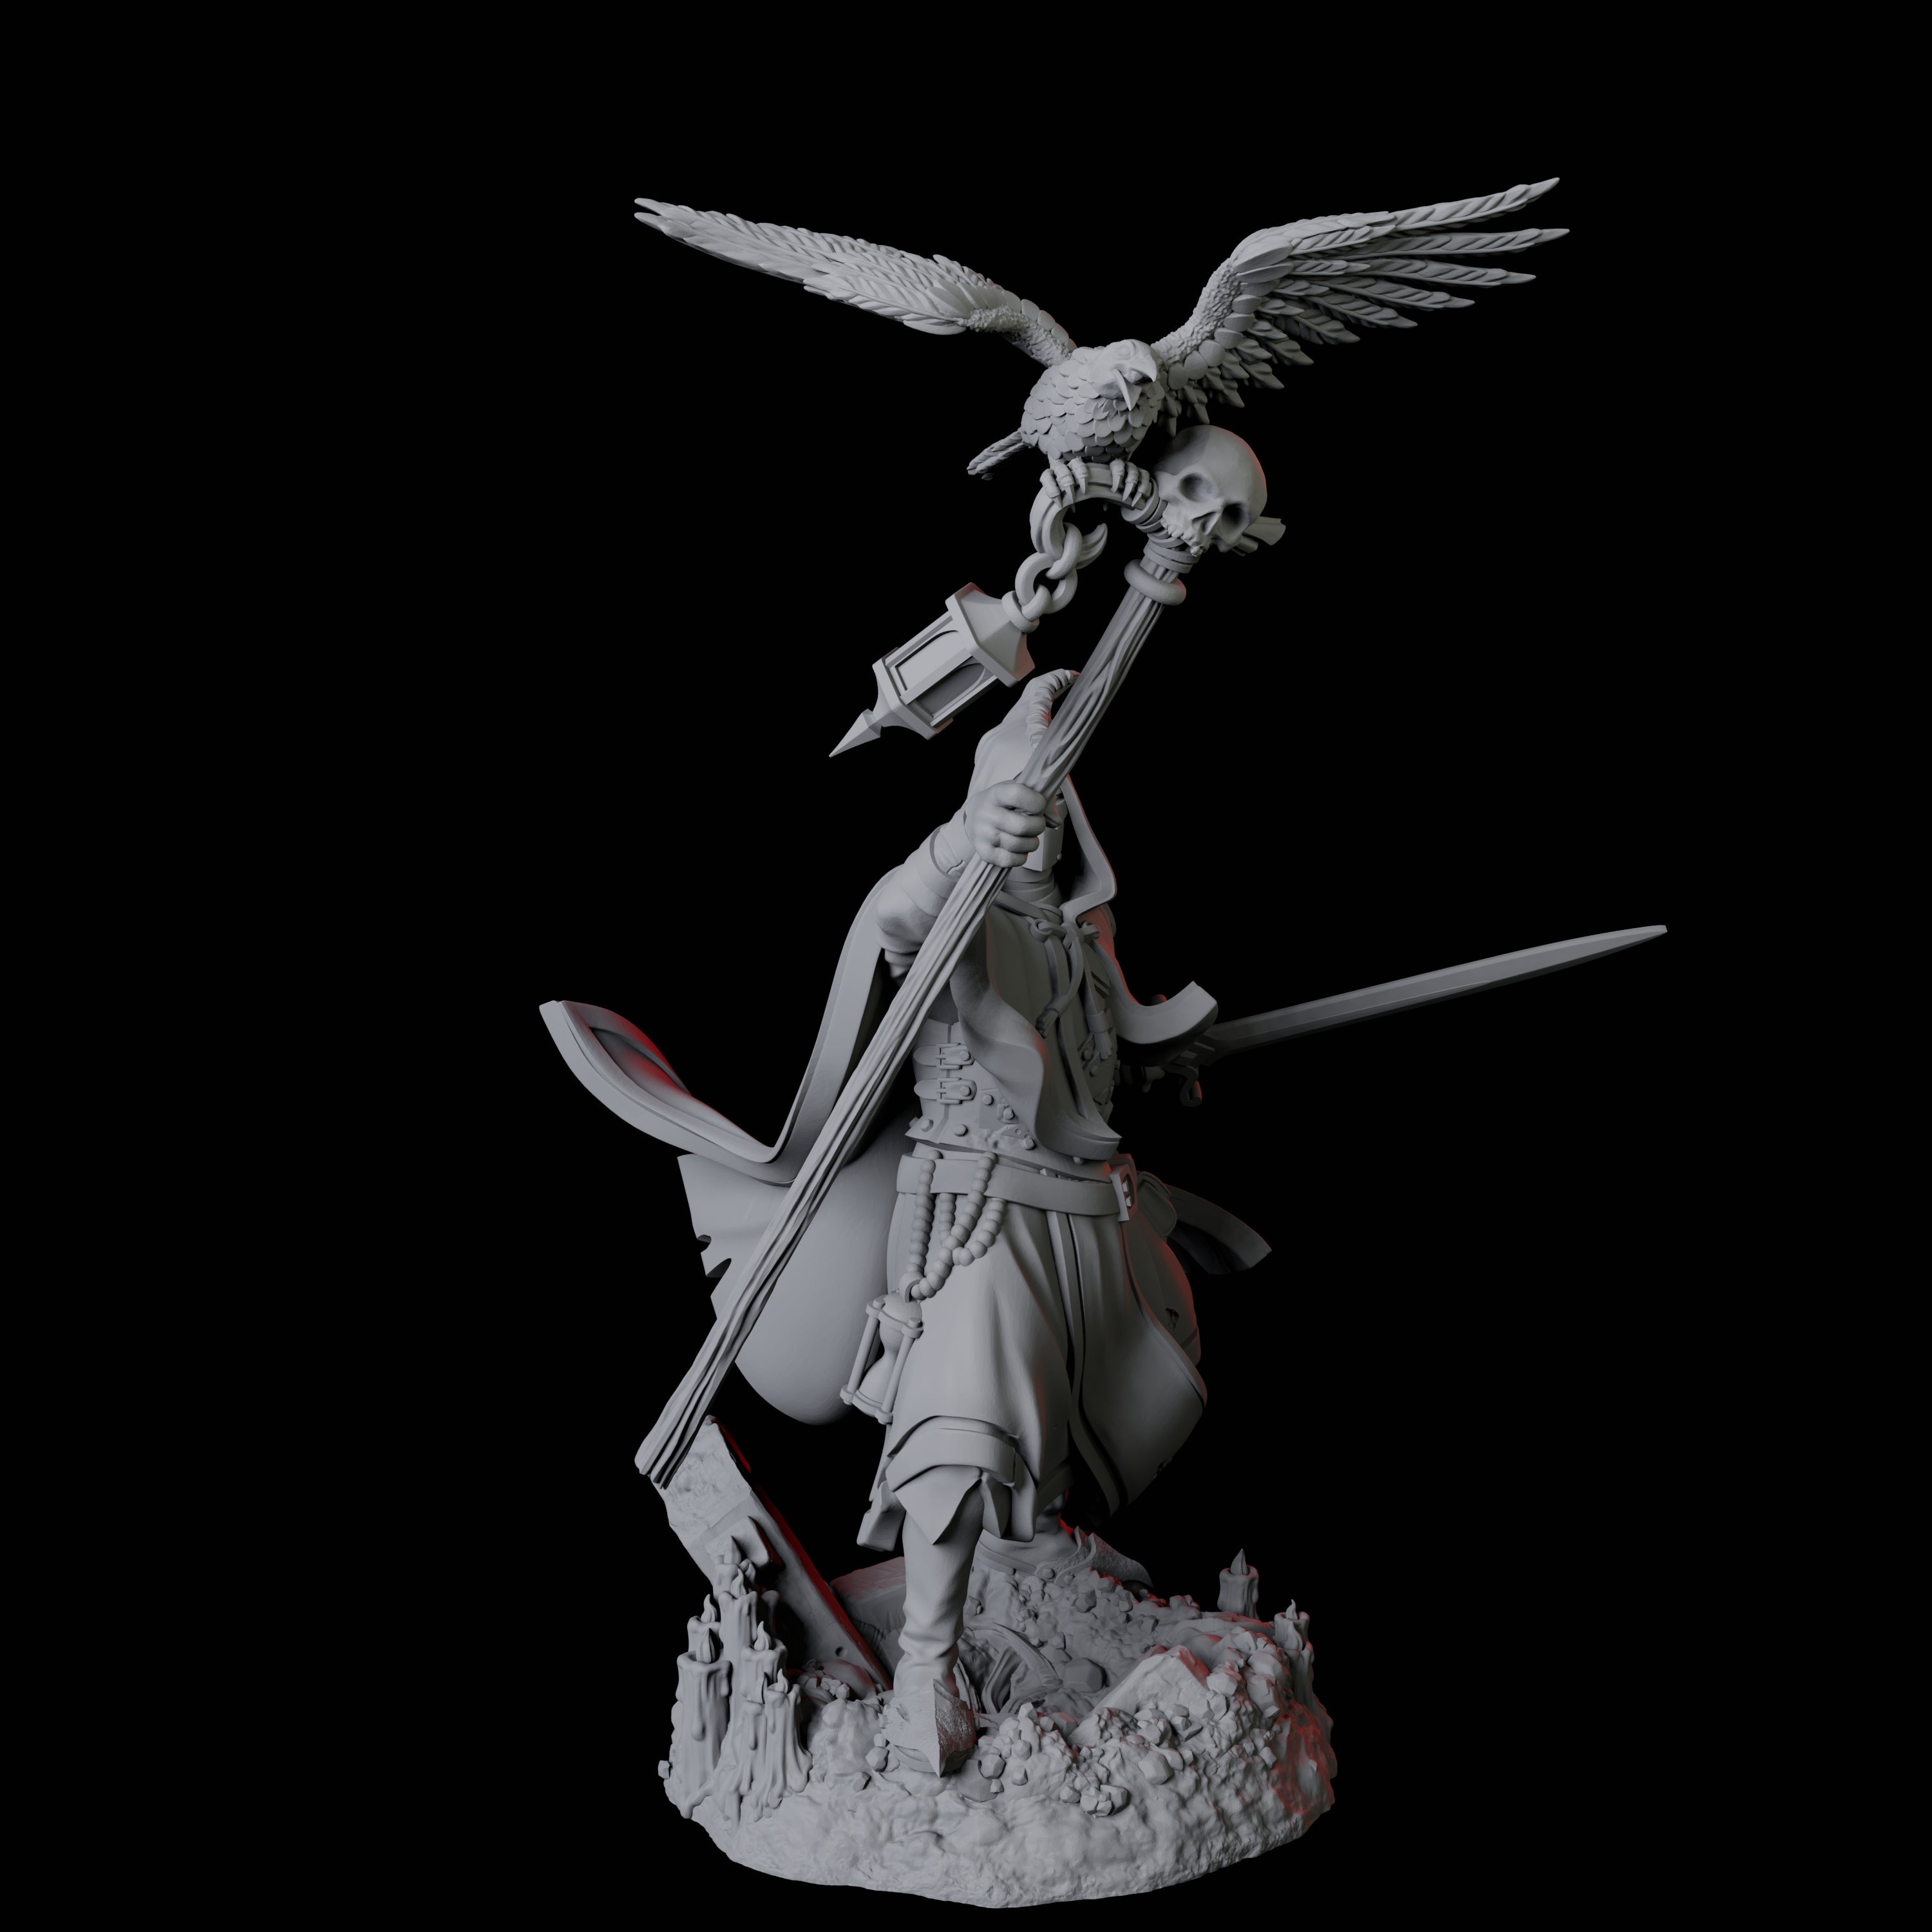 Four Creepy Gravediggers Miniature for Dungeons and Dragons, Pathfinder or other TTRPGs